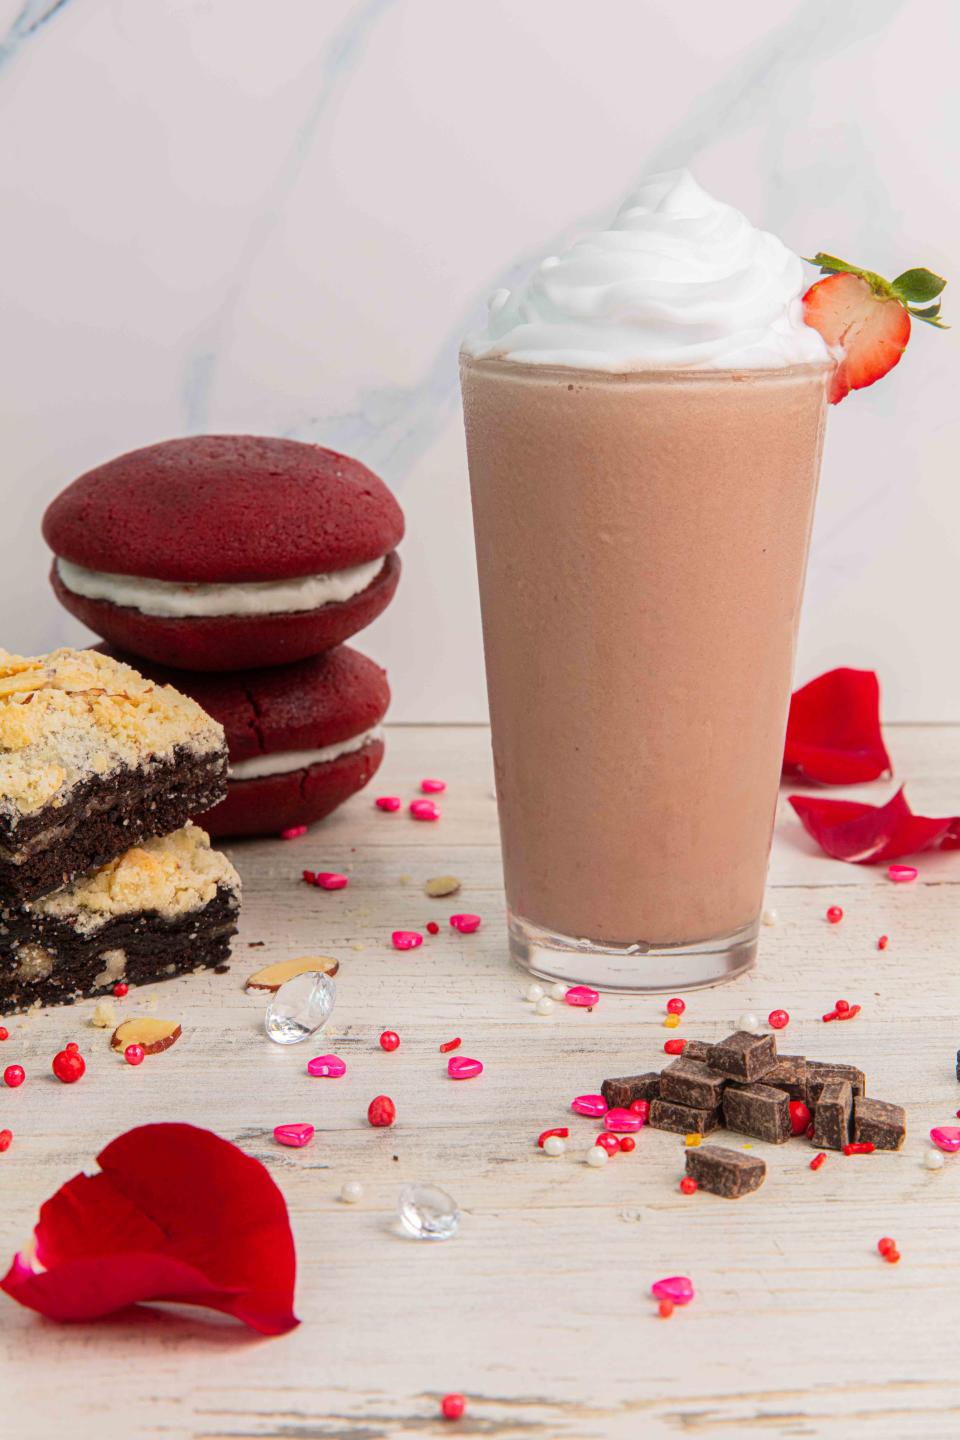 Neon Marketplace, with locations that include Providence and Warwick, will have specials for Valentine's Day, including whoopie pies.